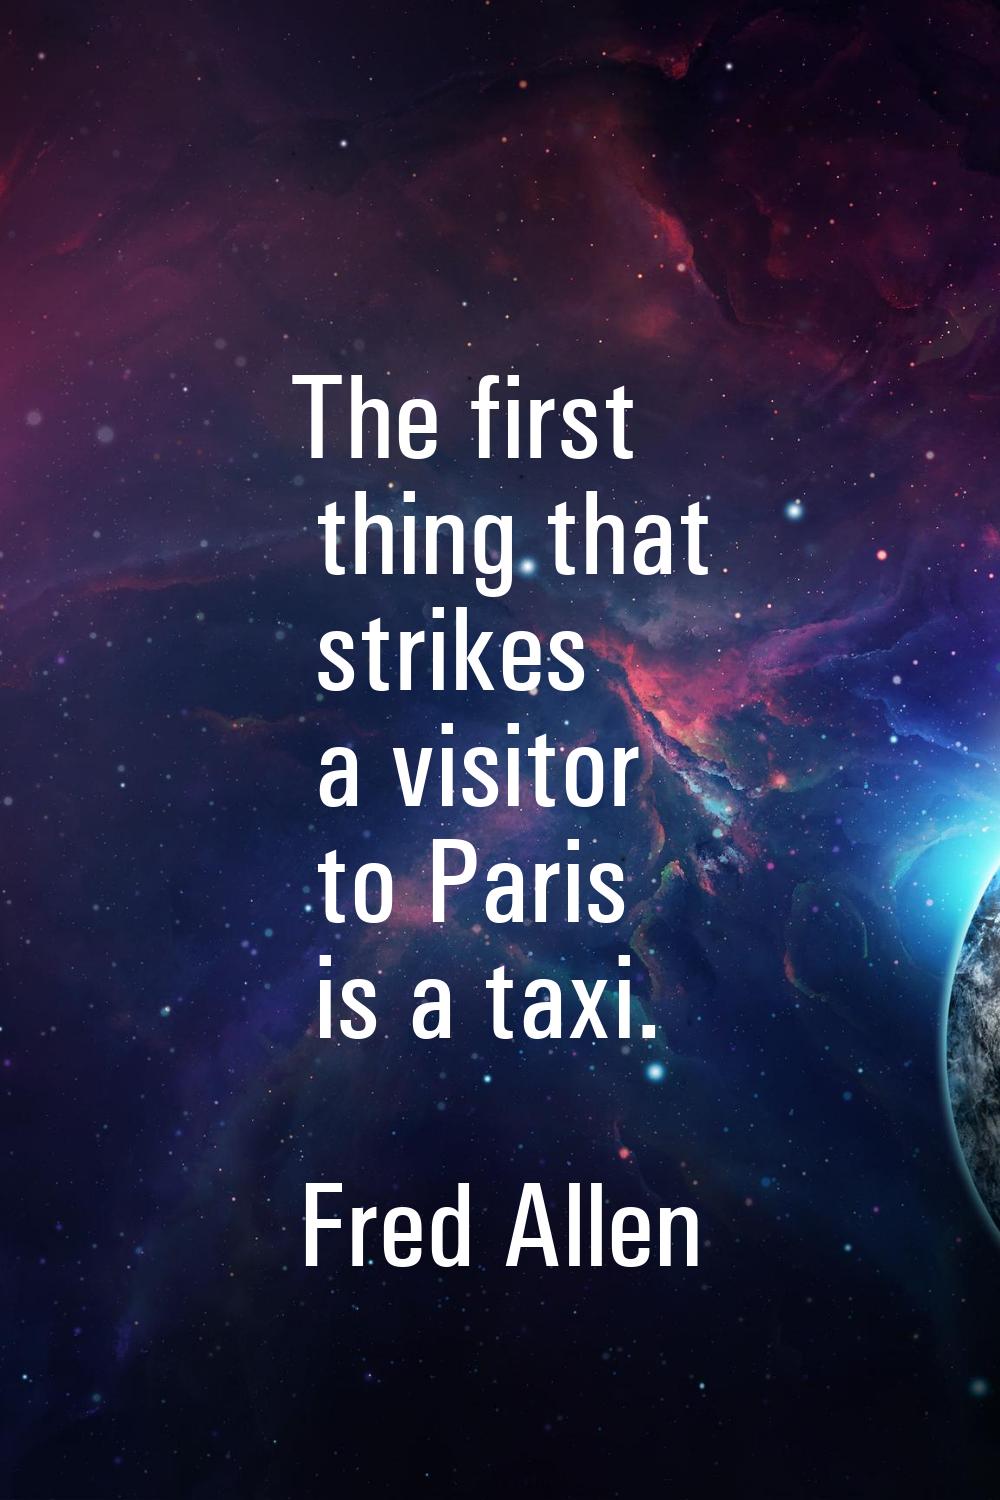 The first thing that strikes a visitor to Paris is a taxi.